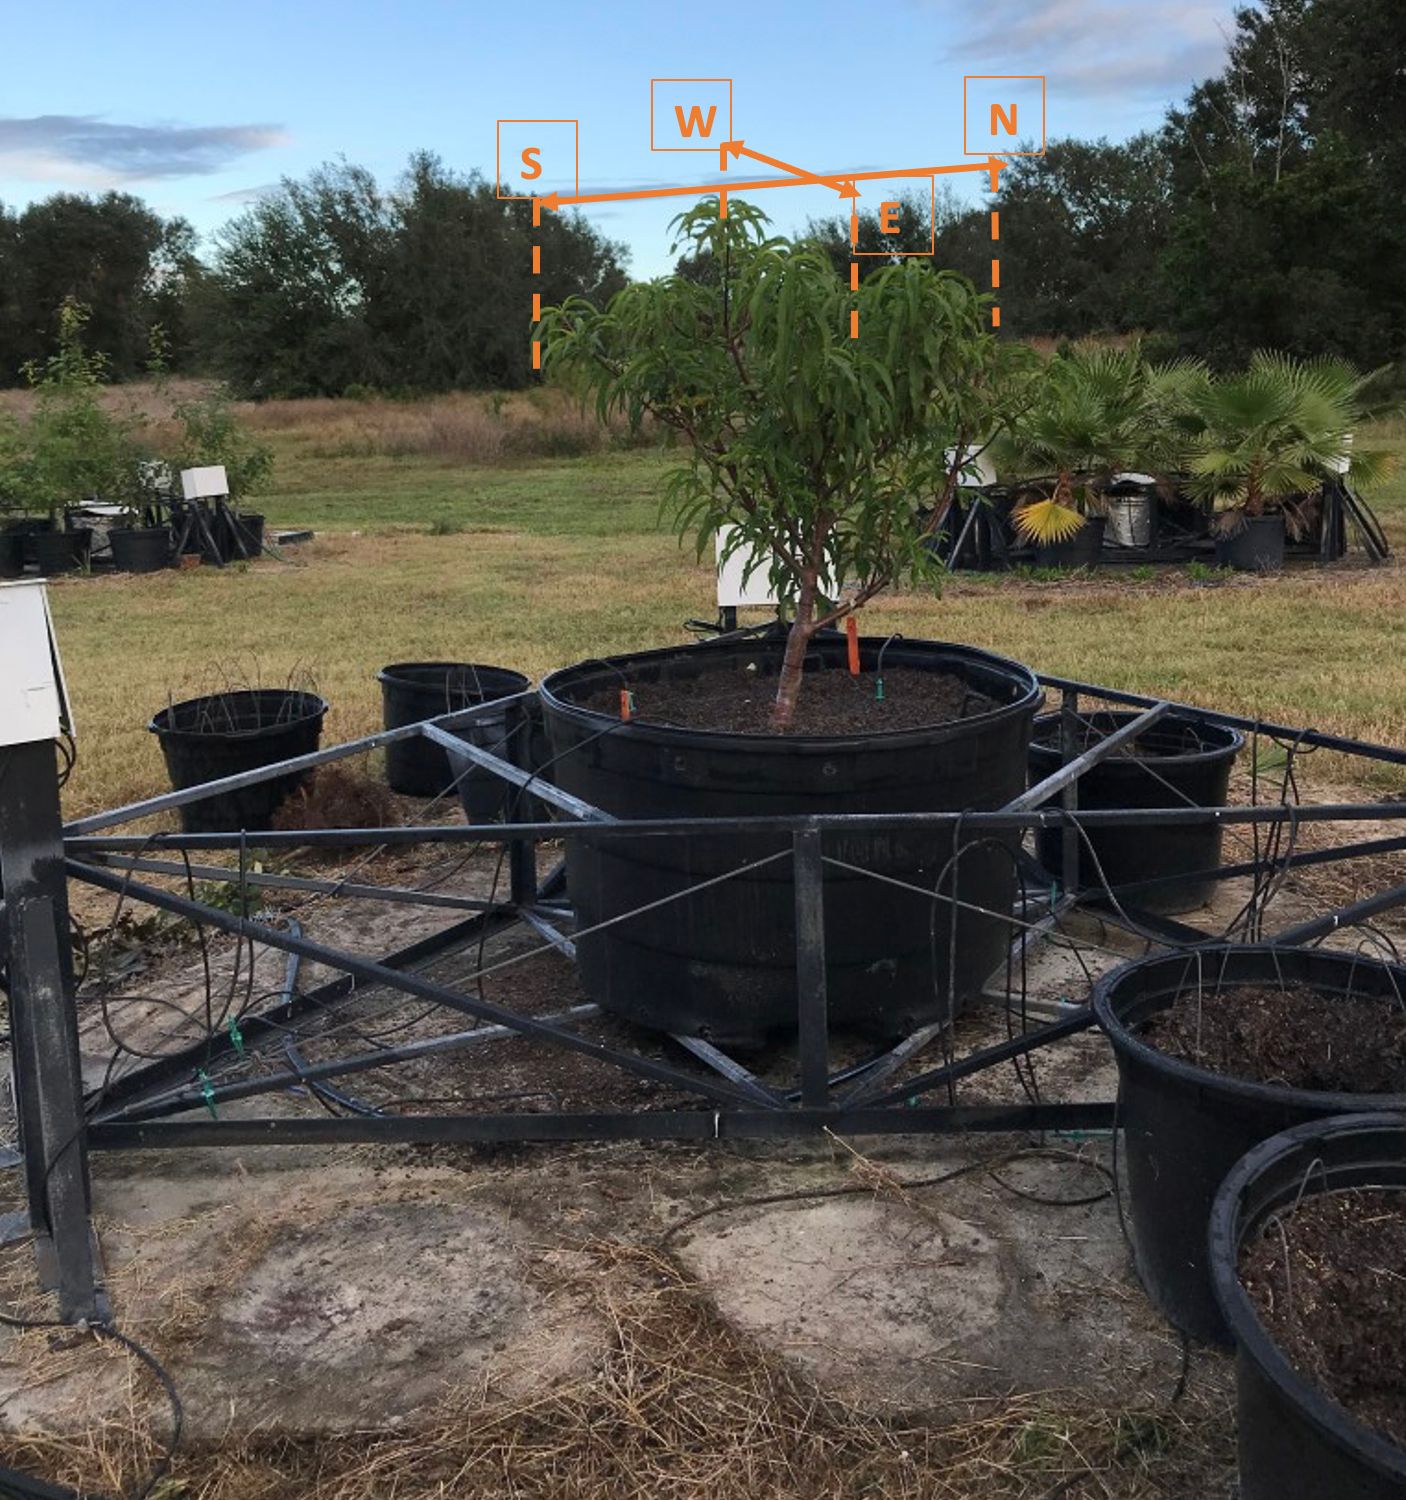 Weighing lysimeter used to determine the actual evapotranspiration (ETA) of young peach trees by weighting the volume of water is lost by evf4aporation and transpiration daily. The yellow arrows indicate the projected canopy area measurements in feet. 